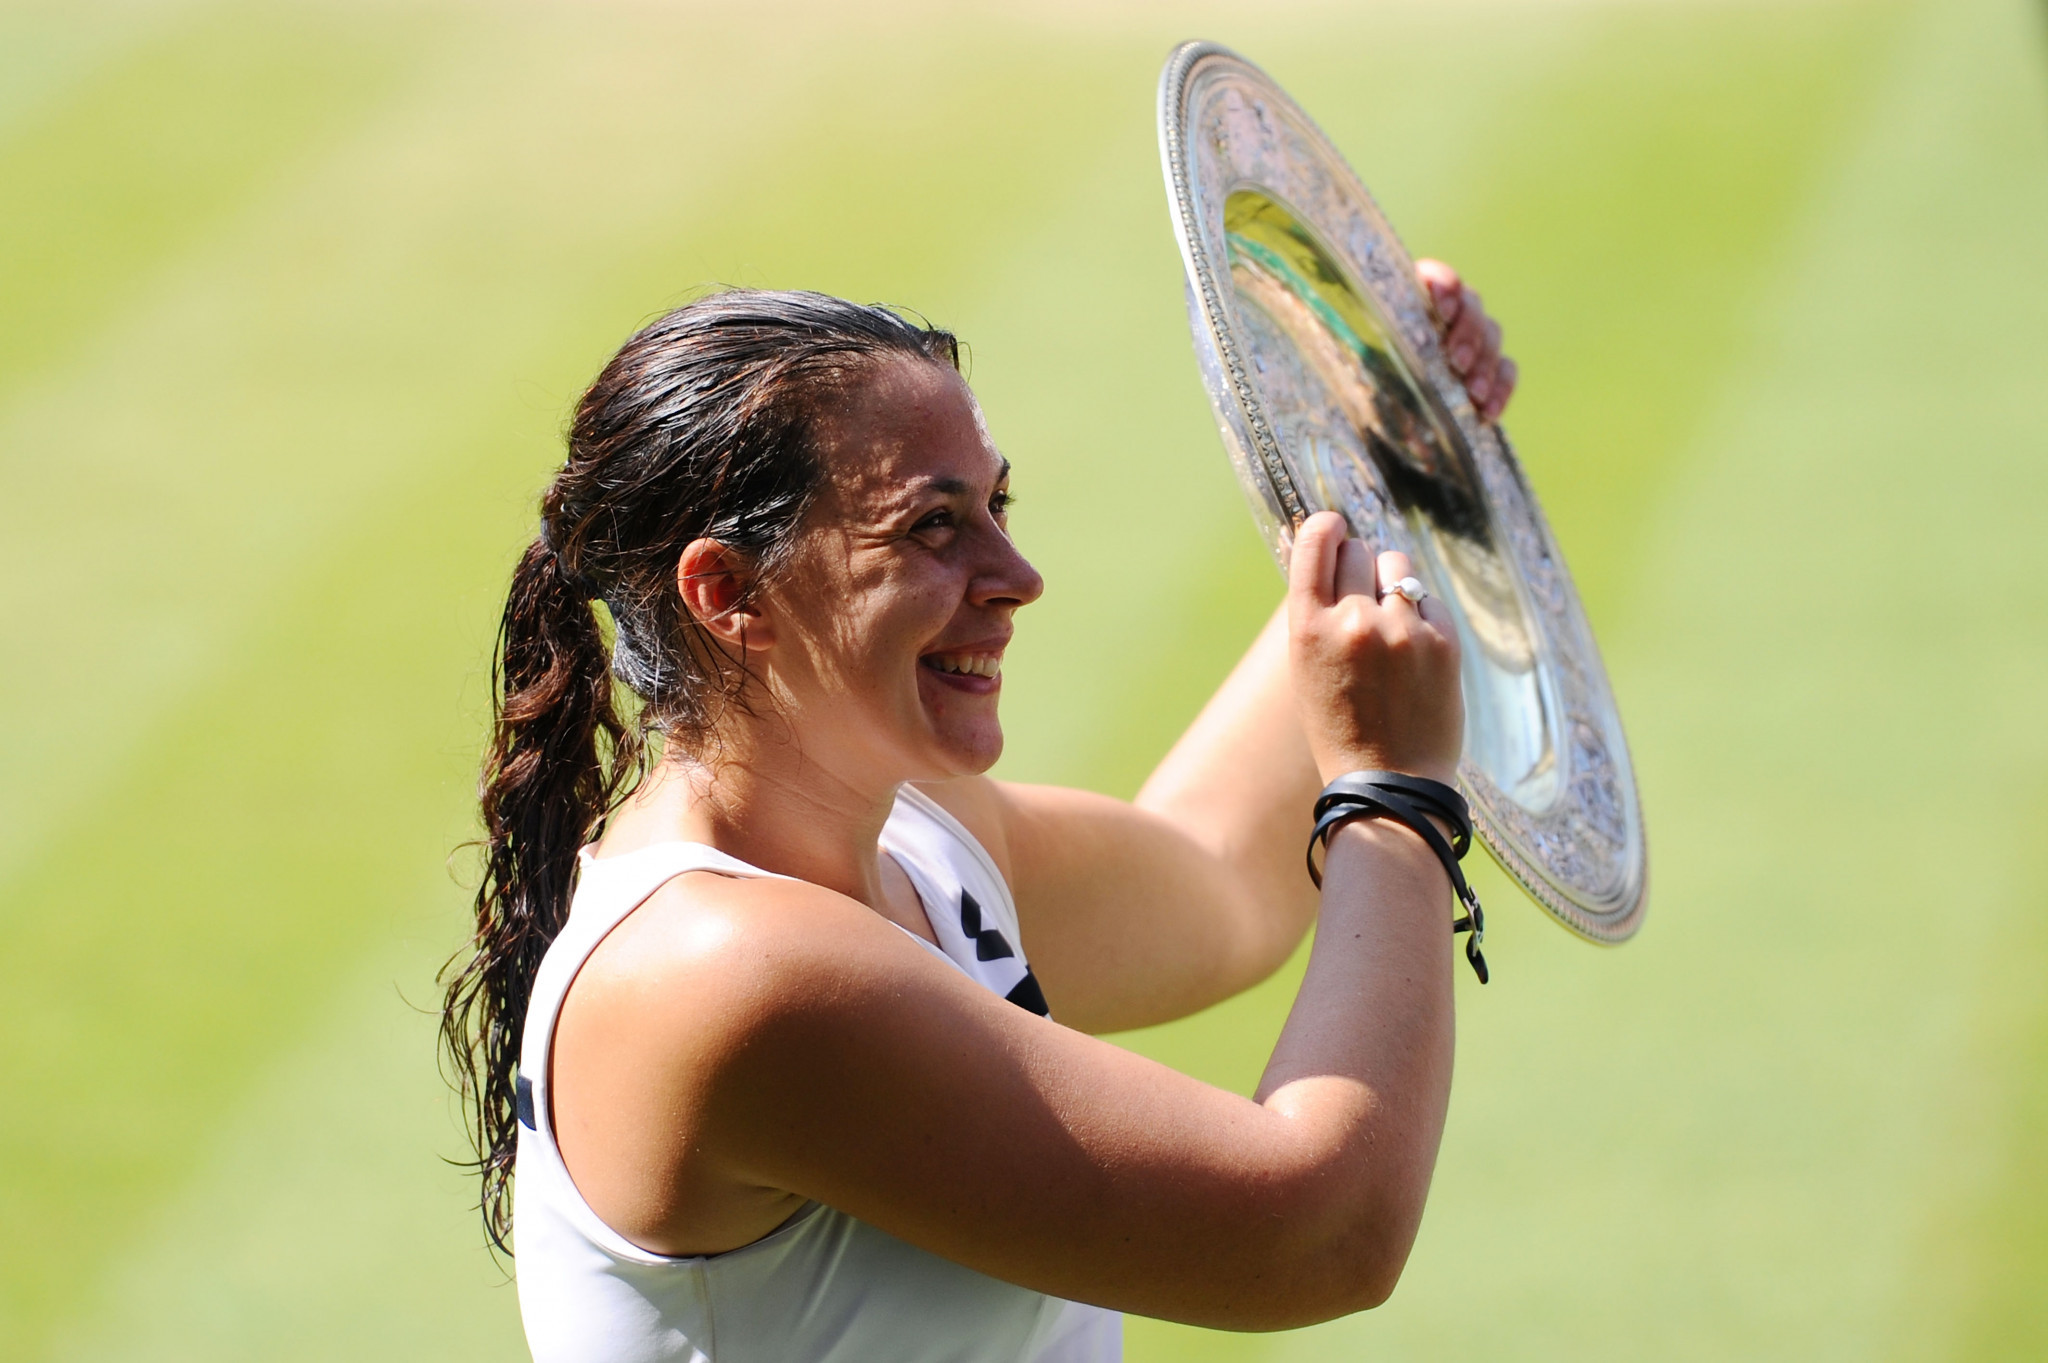 Shock as tennis ace Bartoli comes out of retirement after four year gap